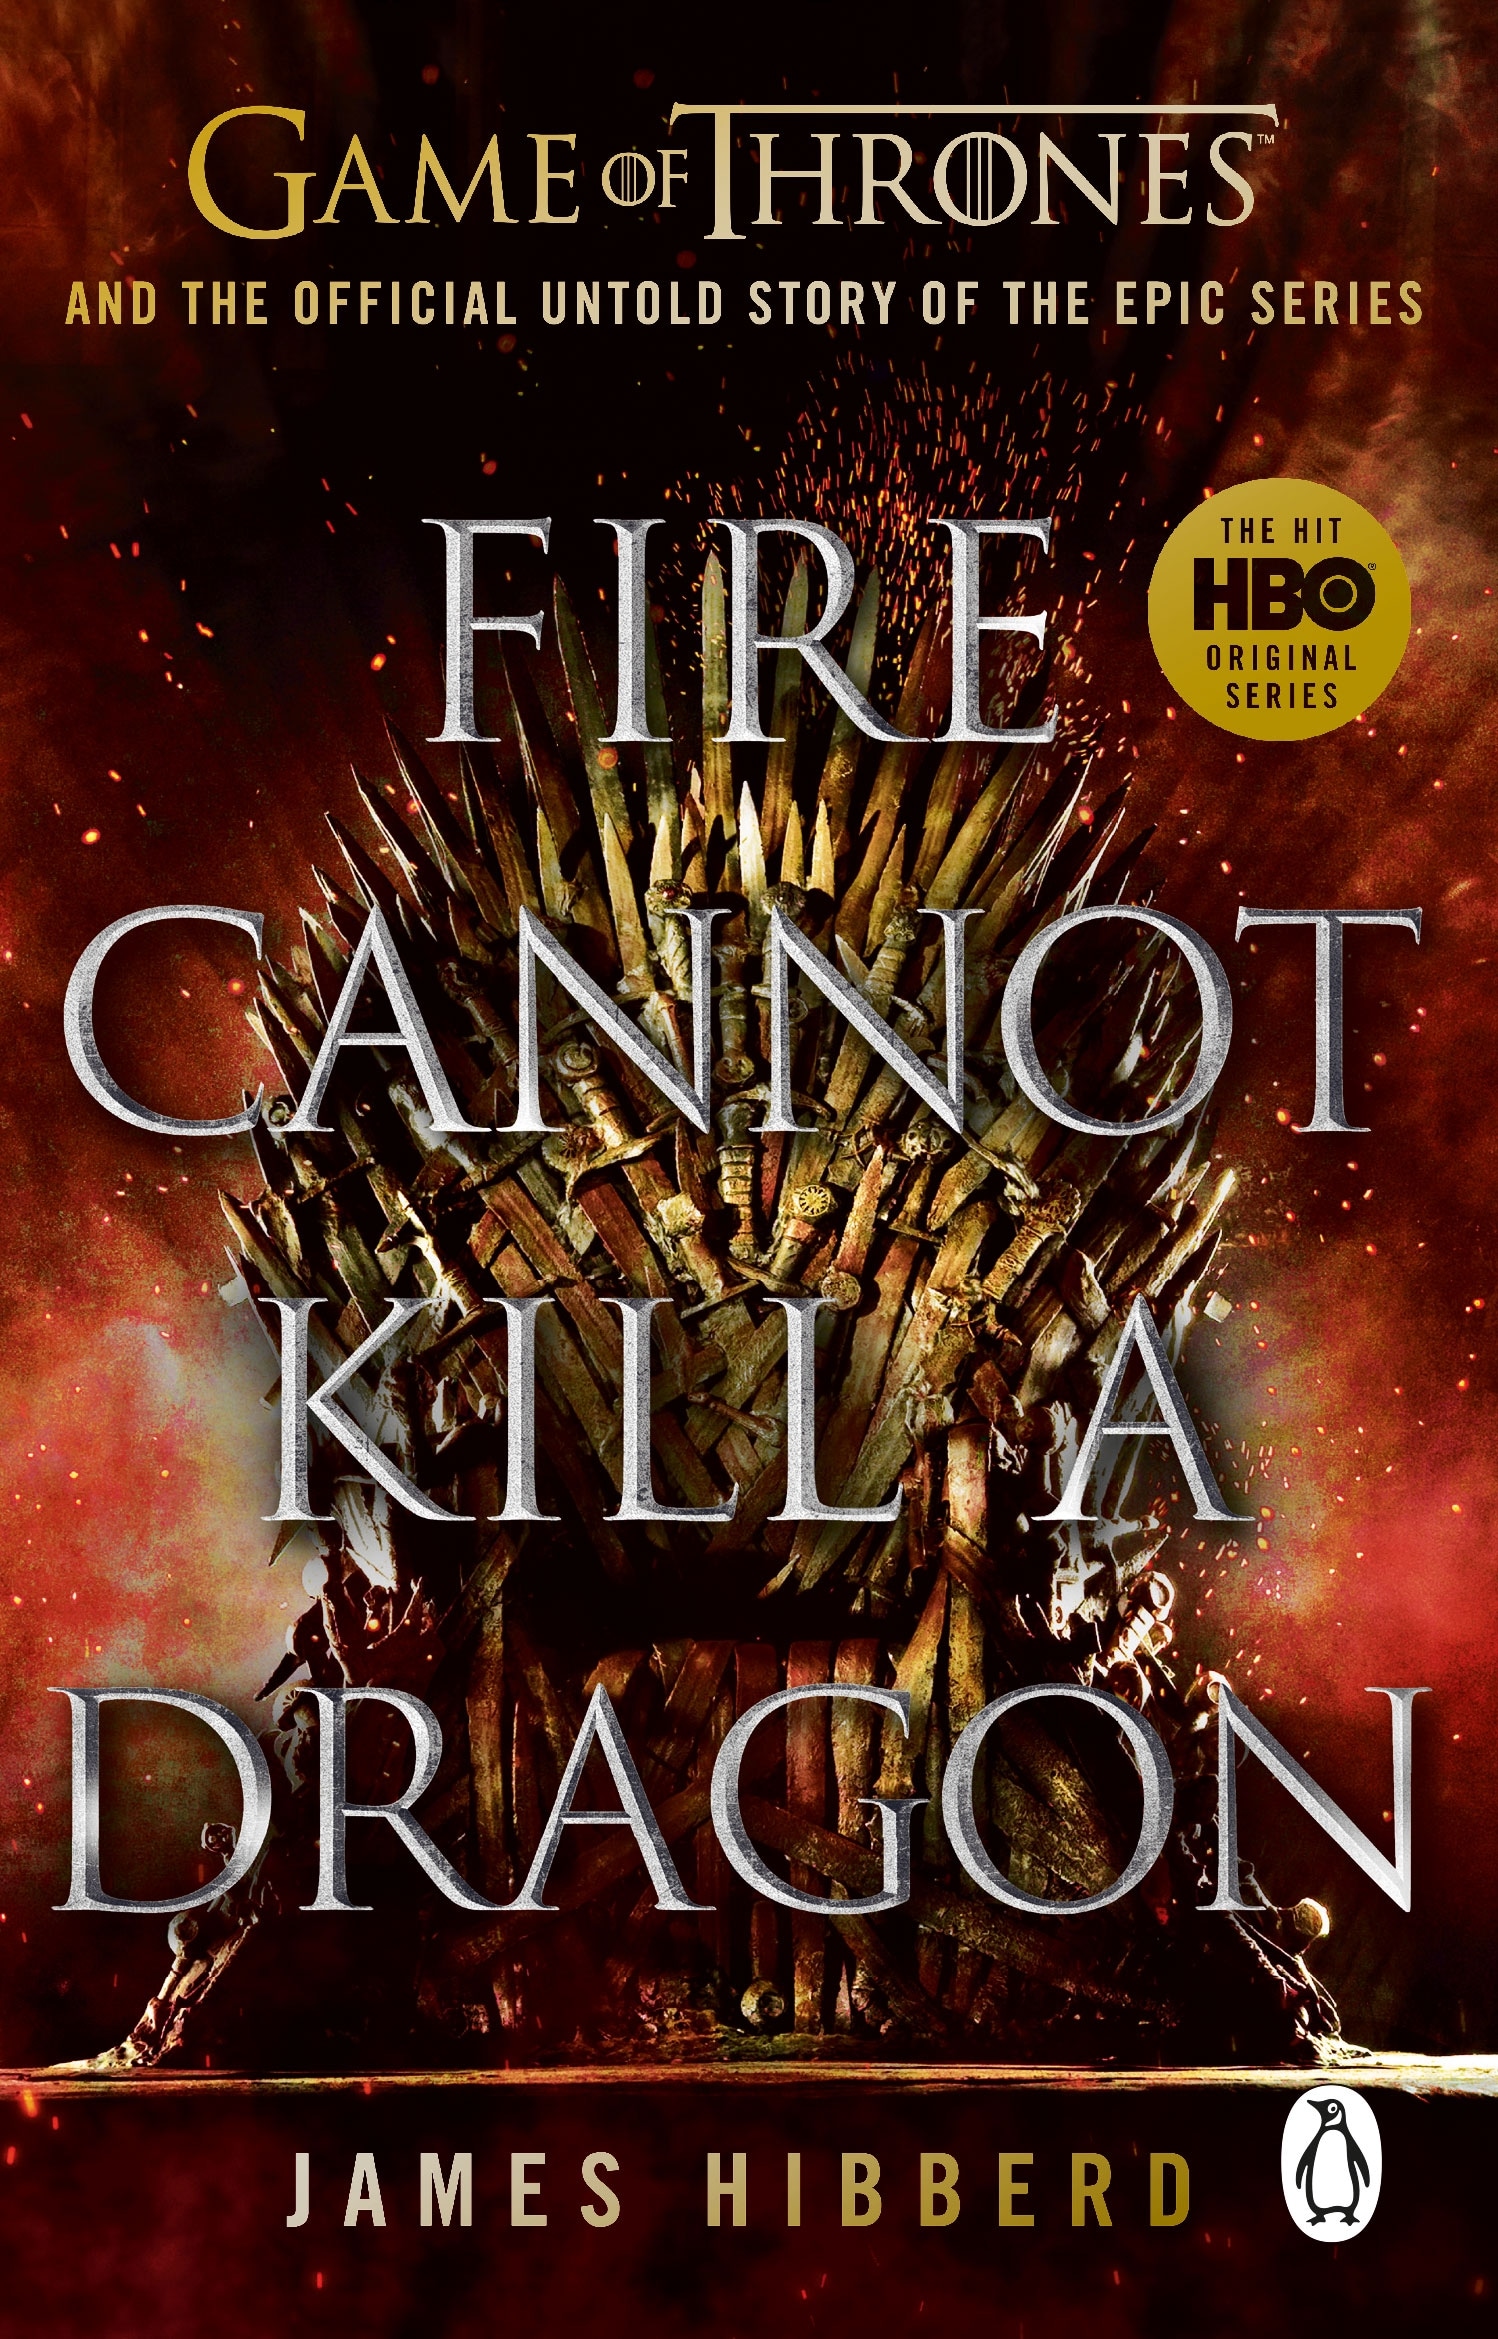 Book “Fire Cannot Kill a Dragon” by James Hibberd — March 3, 2022